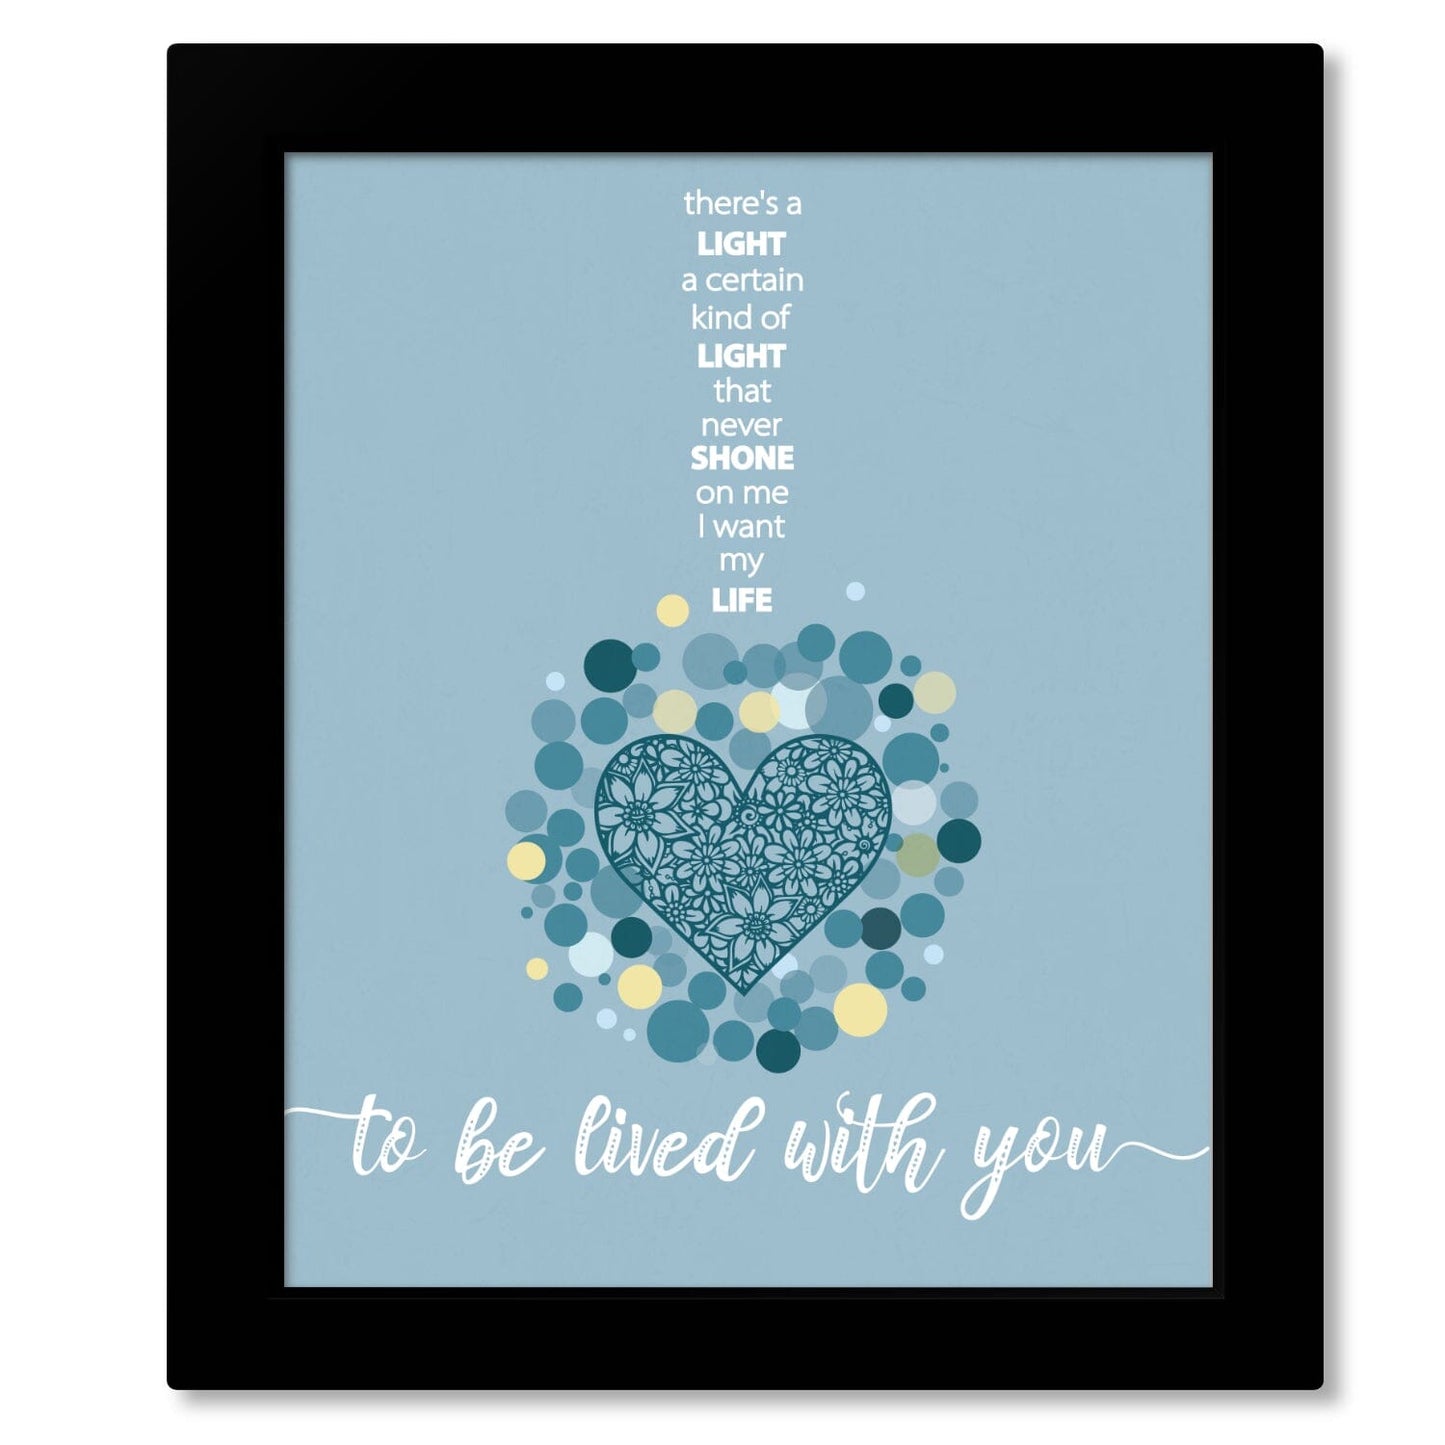 To Love Somebody by the Bee Gees - 60s Song Lyric Art Print Song Lyrics Art Song Lyrics Art 8x10 Framed Print 